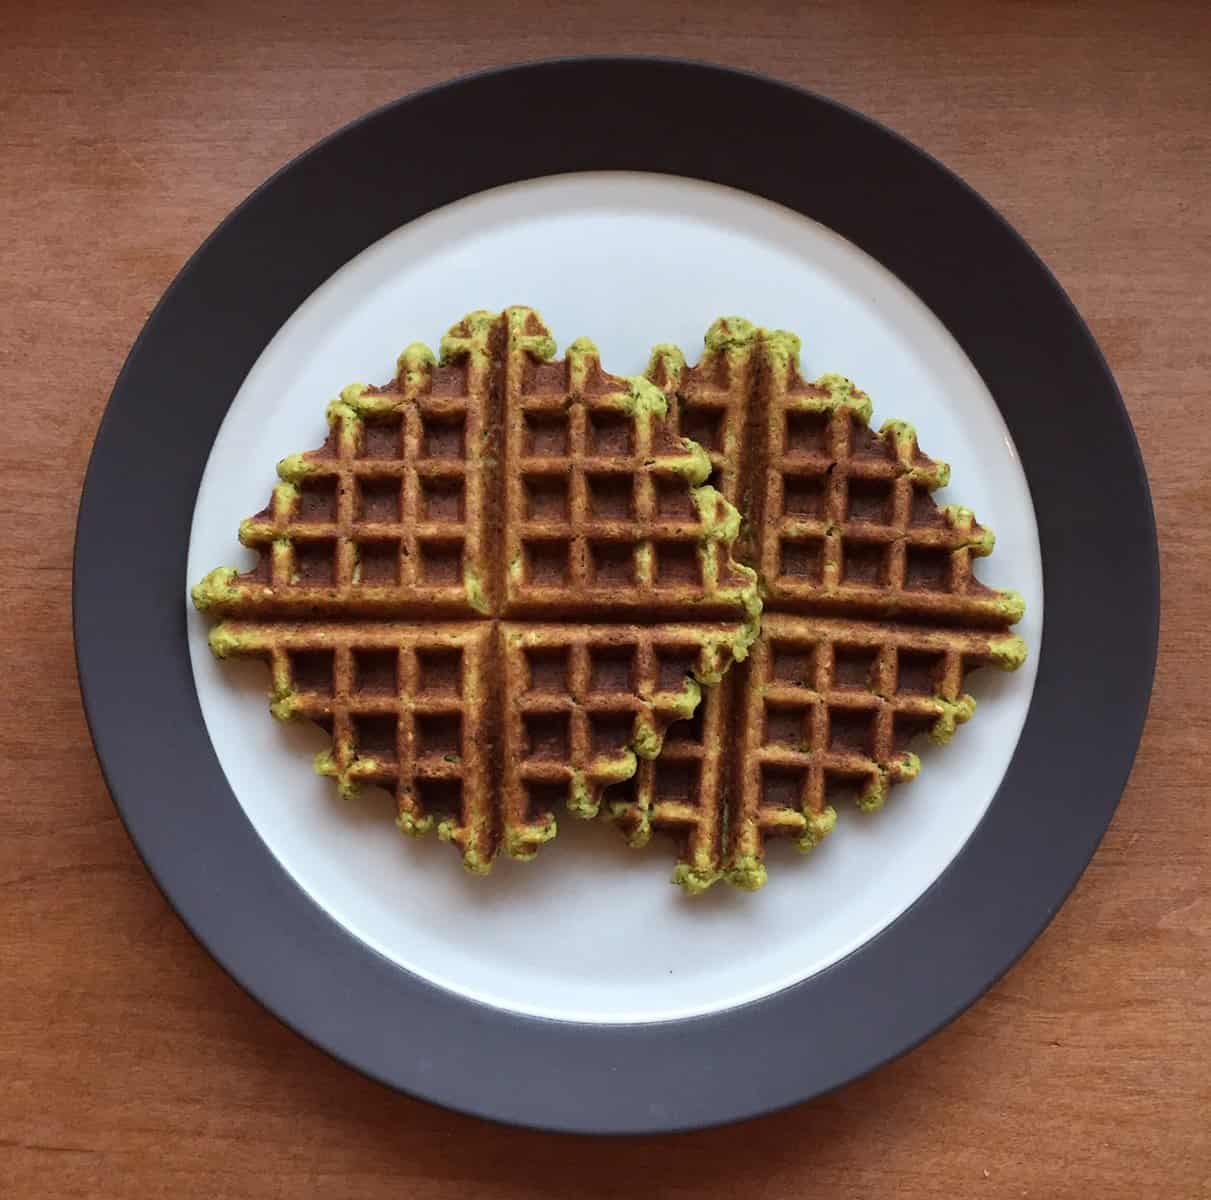 A plate with two waffles made from falafel batter